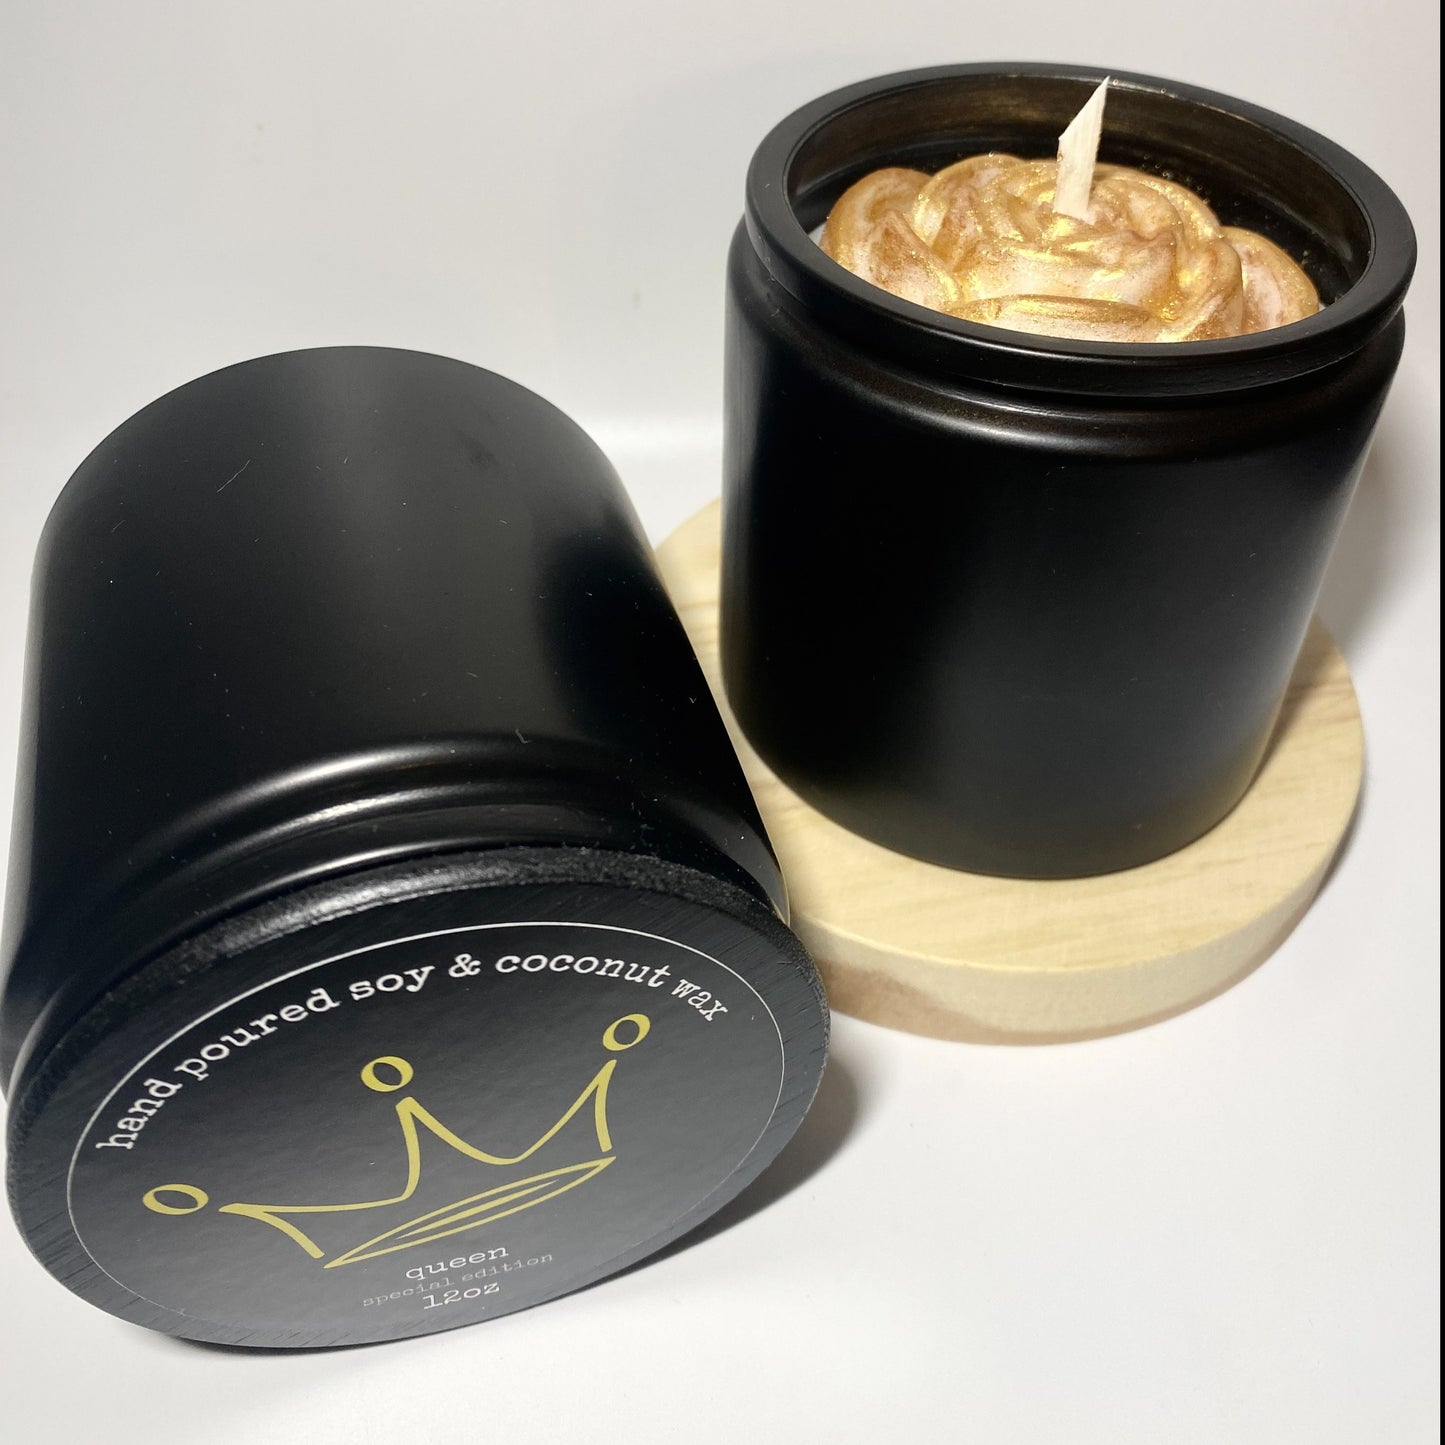 Queen Scent Candle - Eco-Friendly 12 oz.